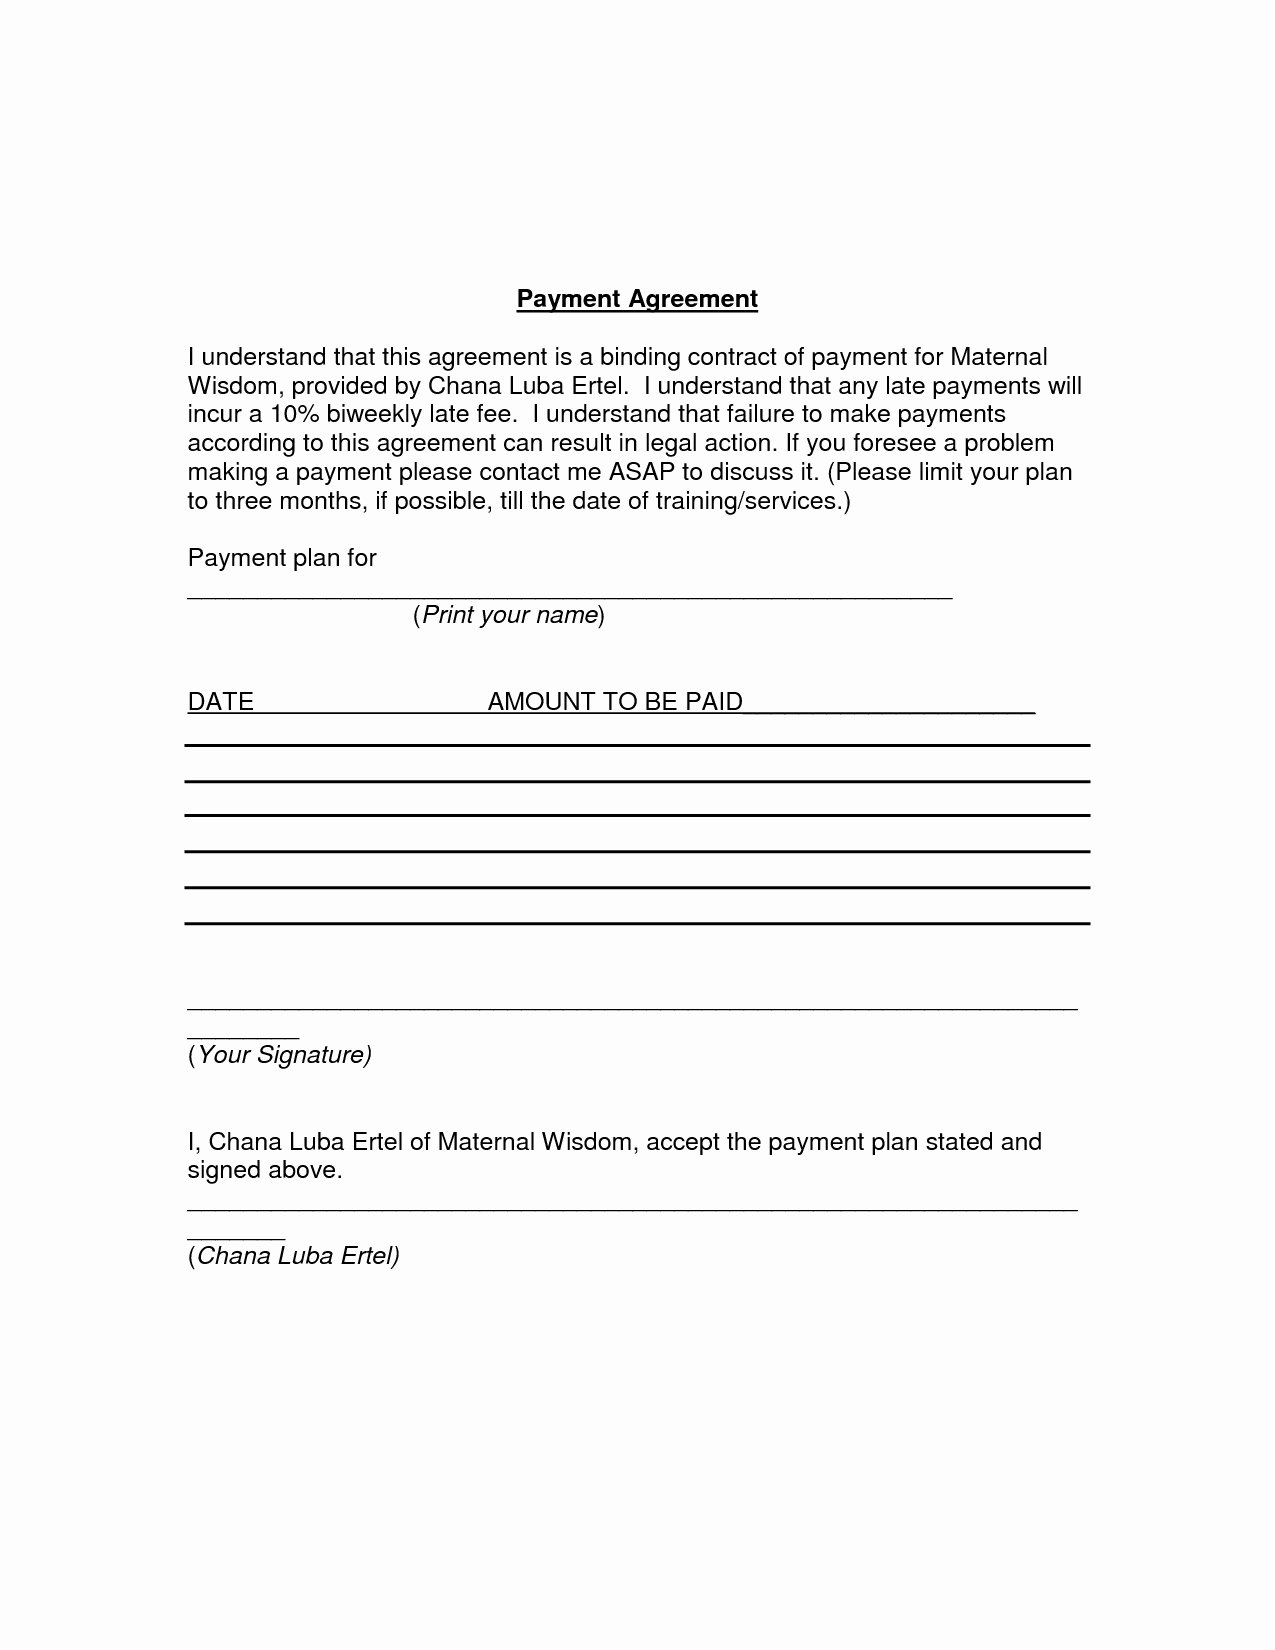 Payment Plan Agreement Template Word Unique Payment Agreement Contract Advanced 5 Payment Agreement